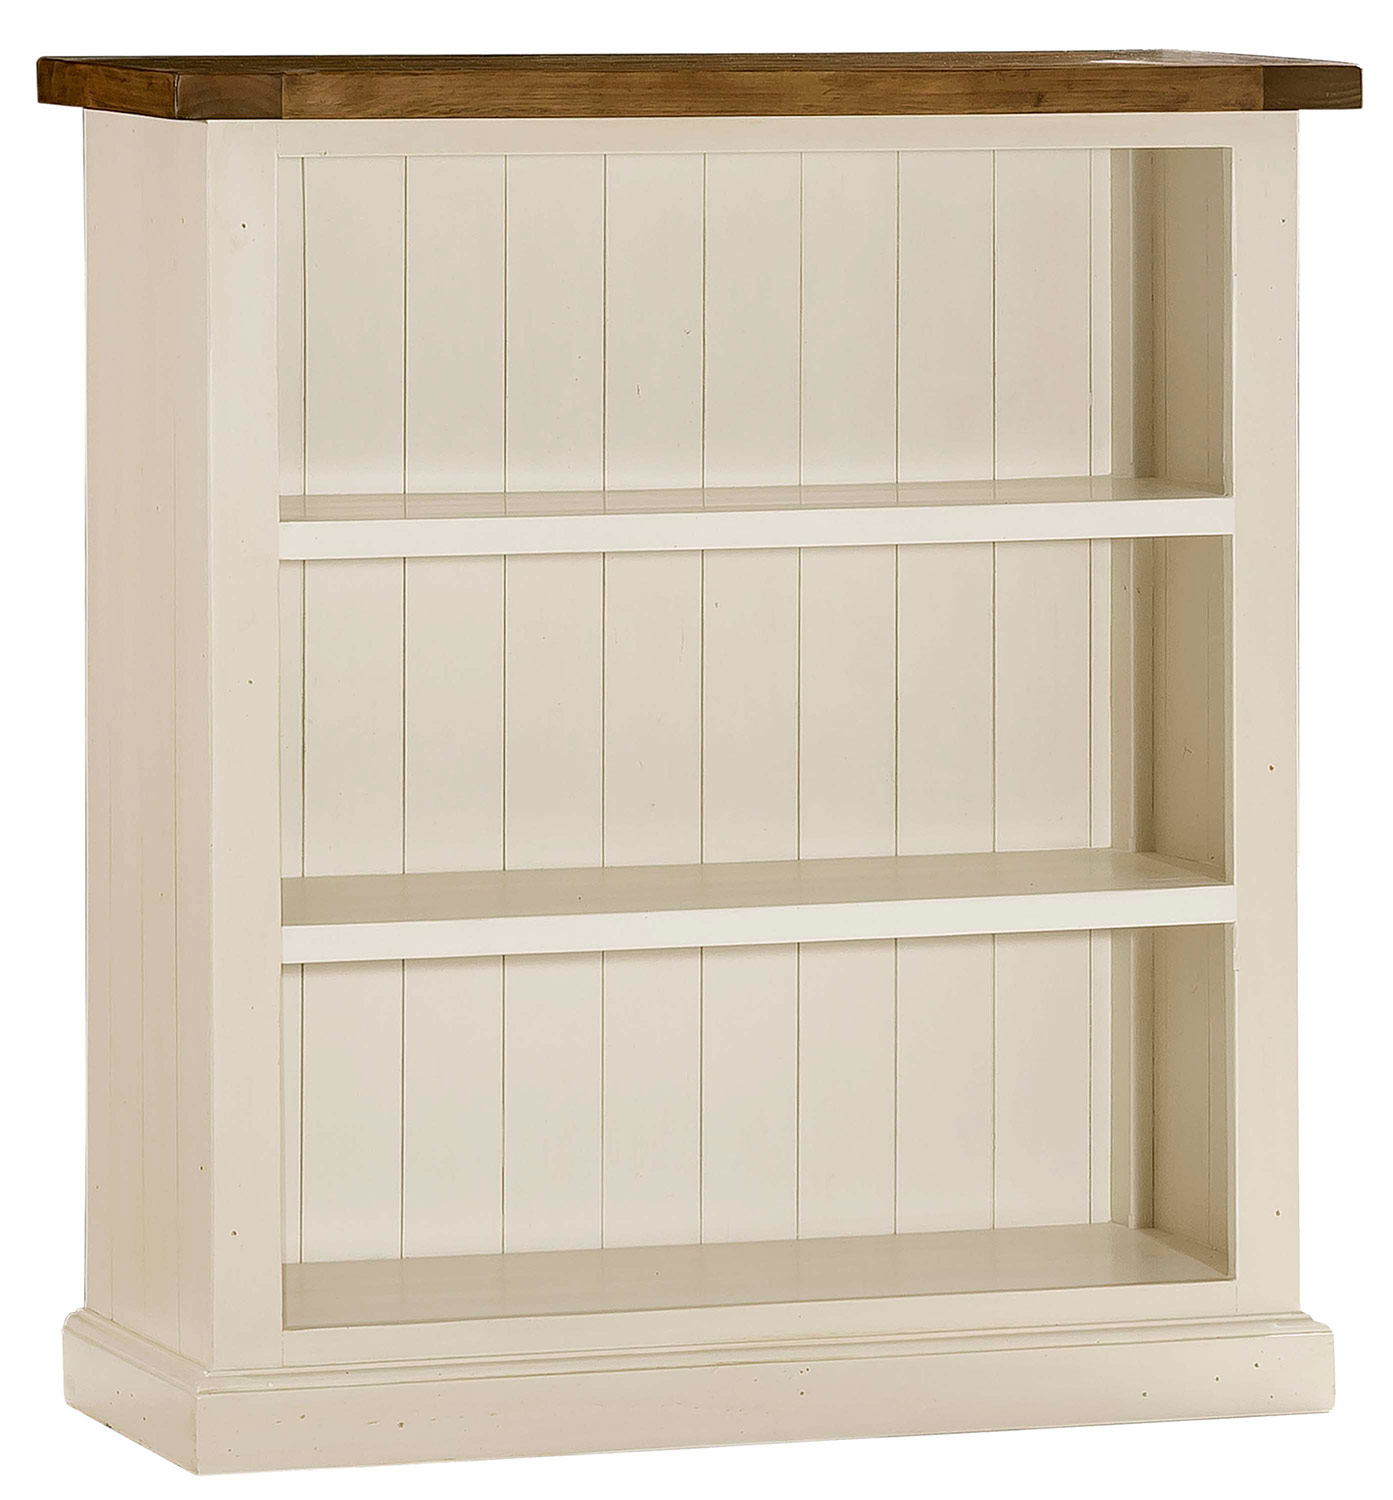 Hillsdale Tuscan Retreat Low Bookcase - Country White